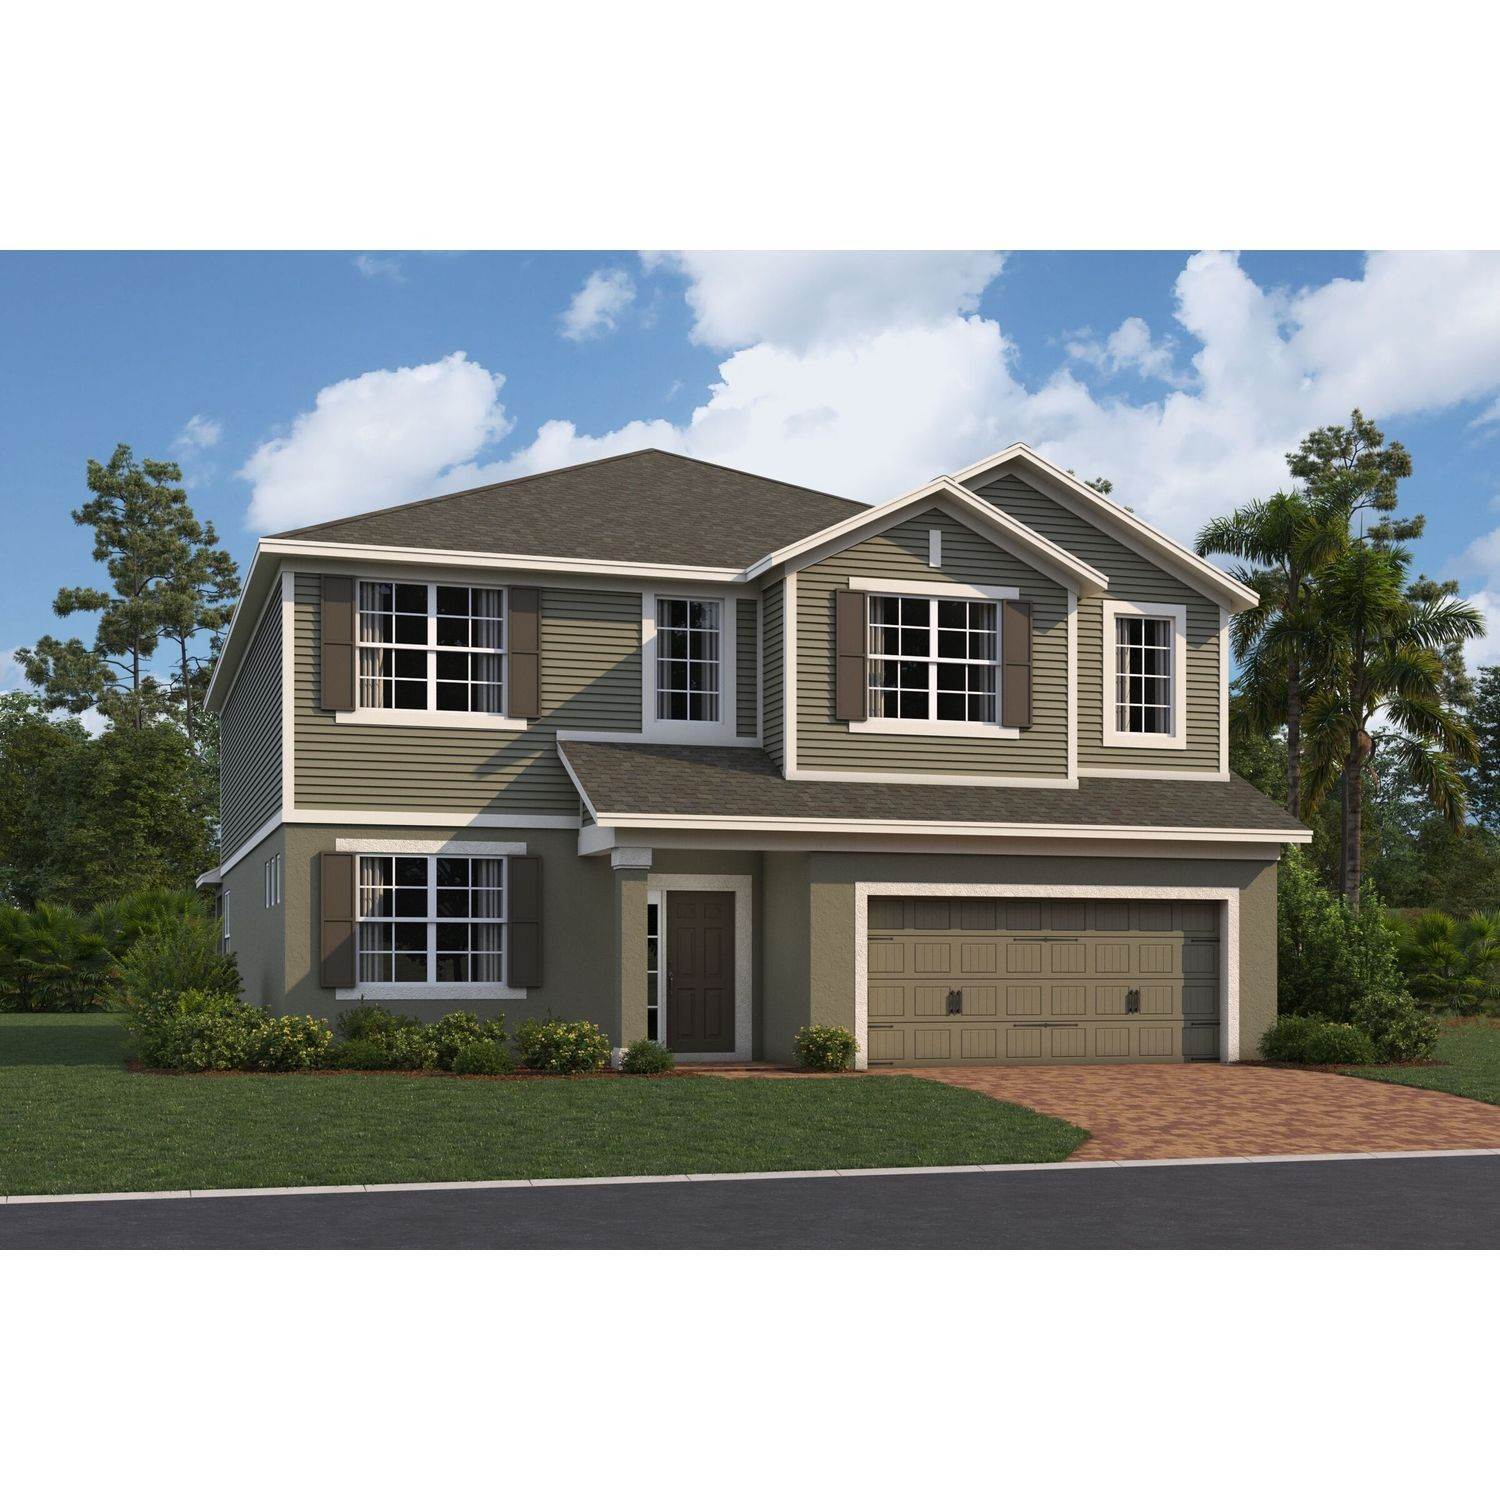 Single Family for Sale at St. Cloud, FL 34772